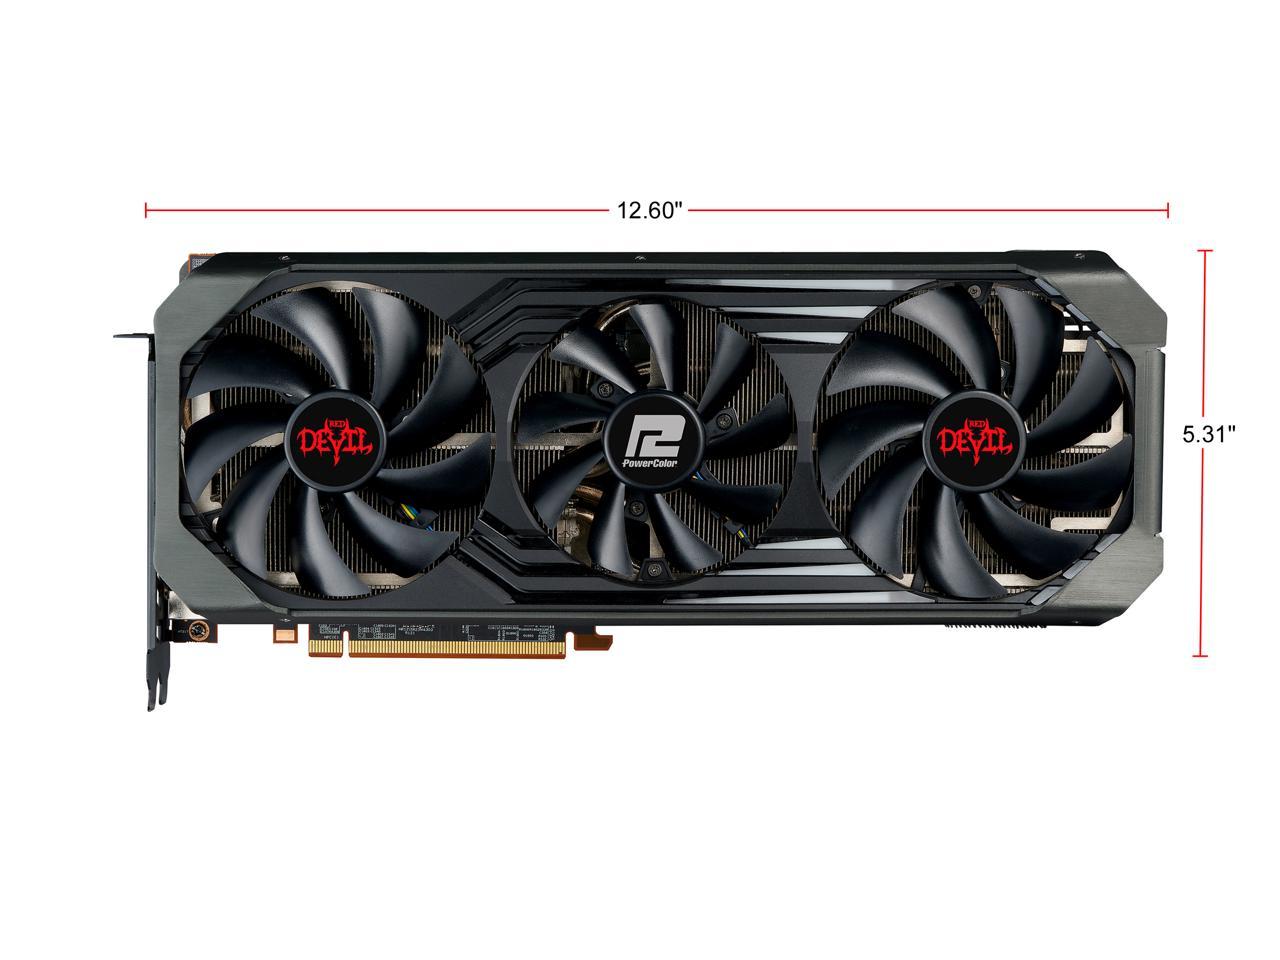 PowerColor Red Devil Limited Edition AMD Radeon RX 6800 Gaming Graphics Card with 16GB GDDR6 Memory, Powered by AMD RDNA 2, Raytracing, PCI Express 4.0, HDMI 2.1, AMD Infinity Cache